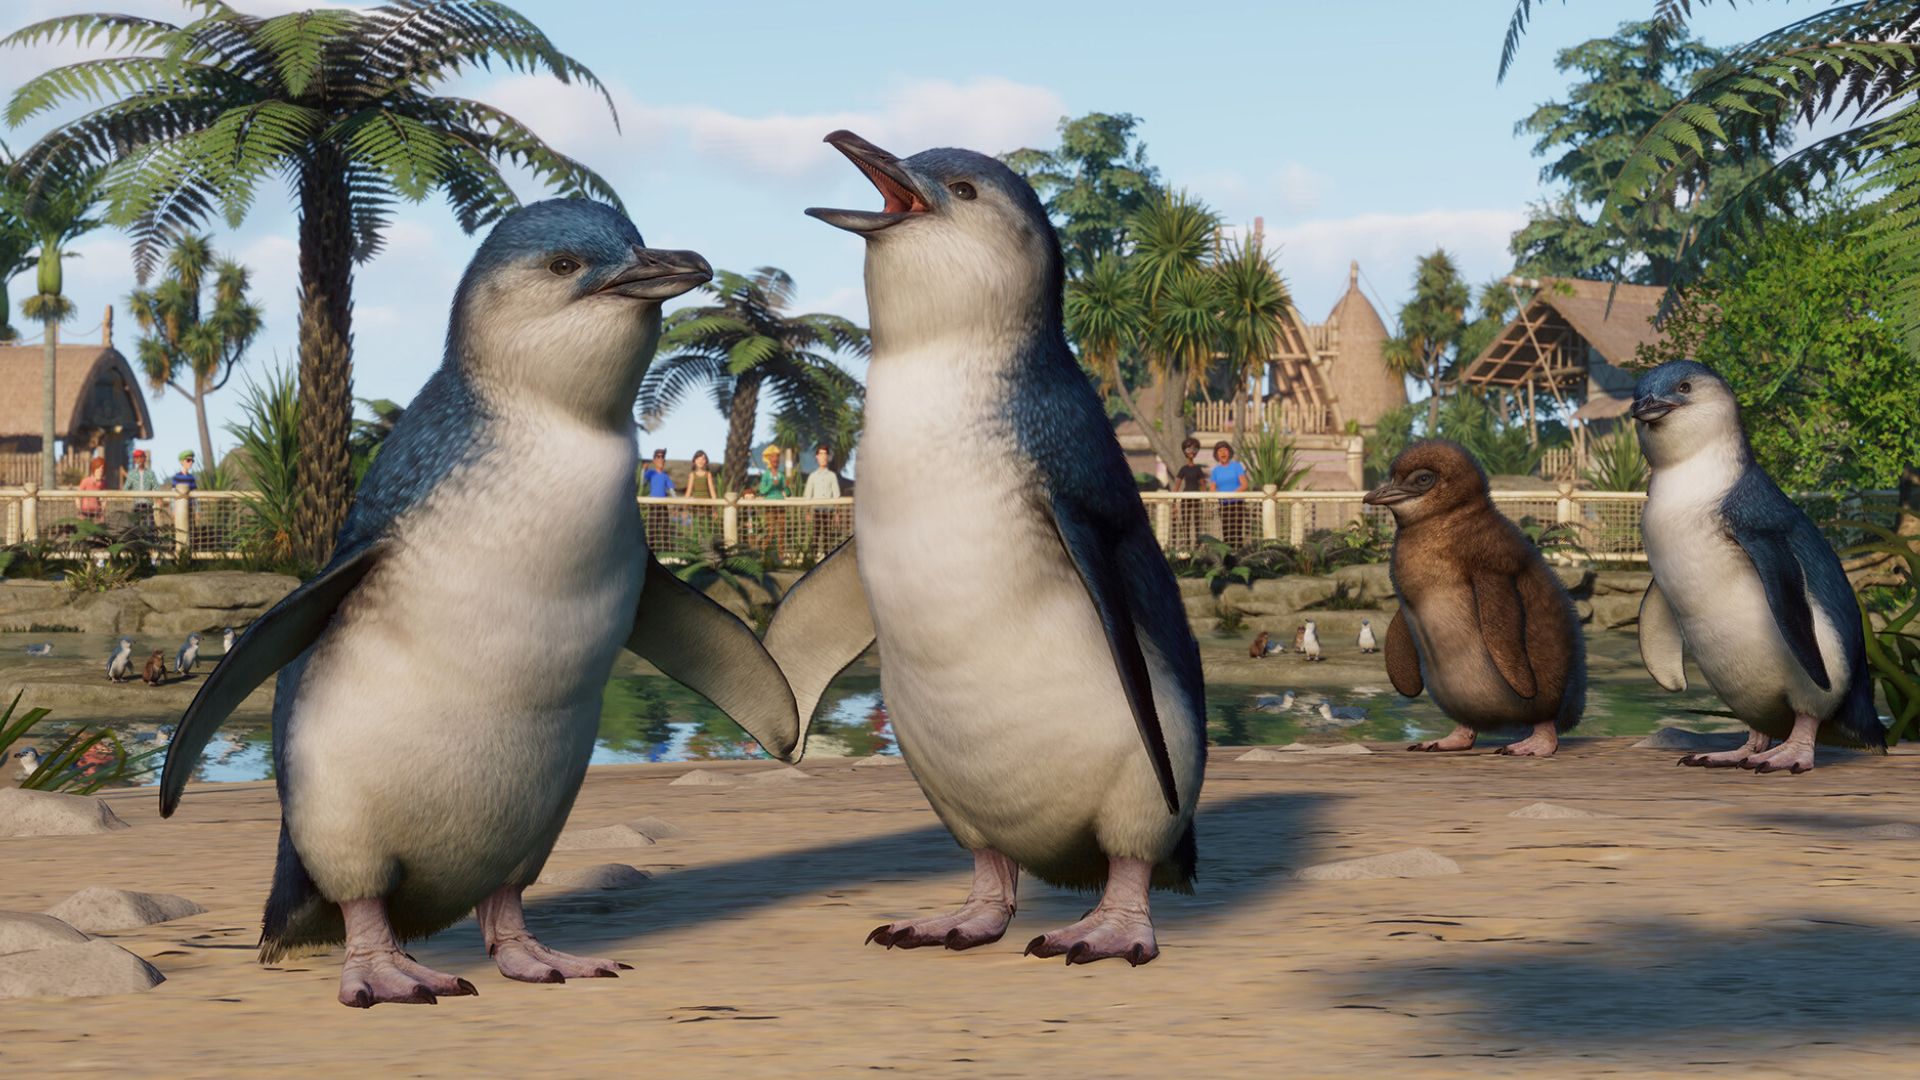 Planet Zoo little penguins in an enclosure stood in a group